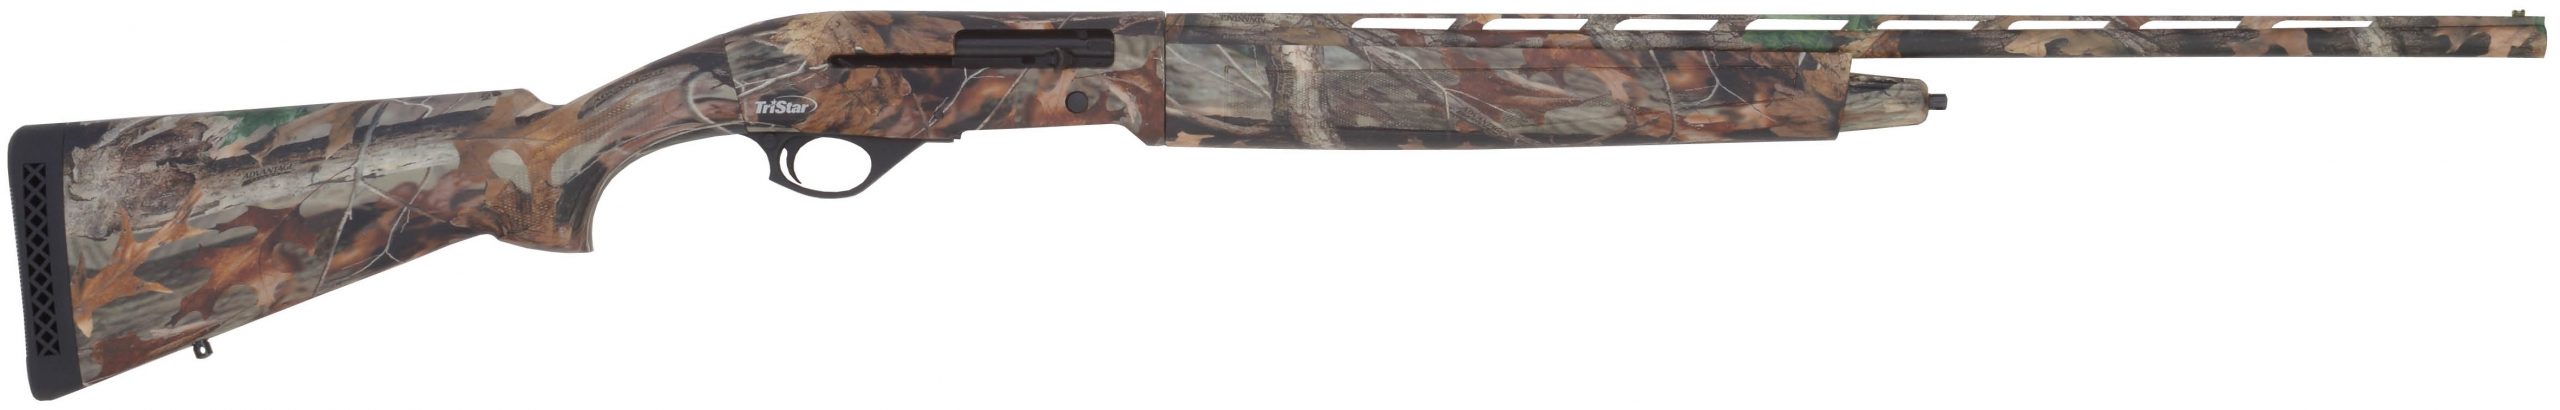 Tristar Sporting Arms Viper G2 410/26 Camo 3″ Real Tree Advantage Timber Ts24143 Scaled